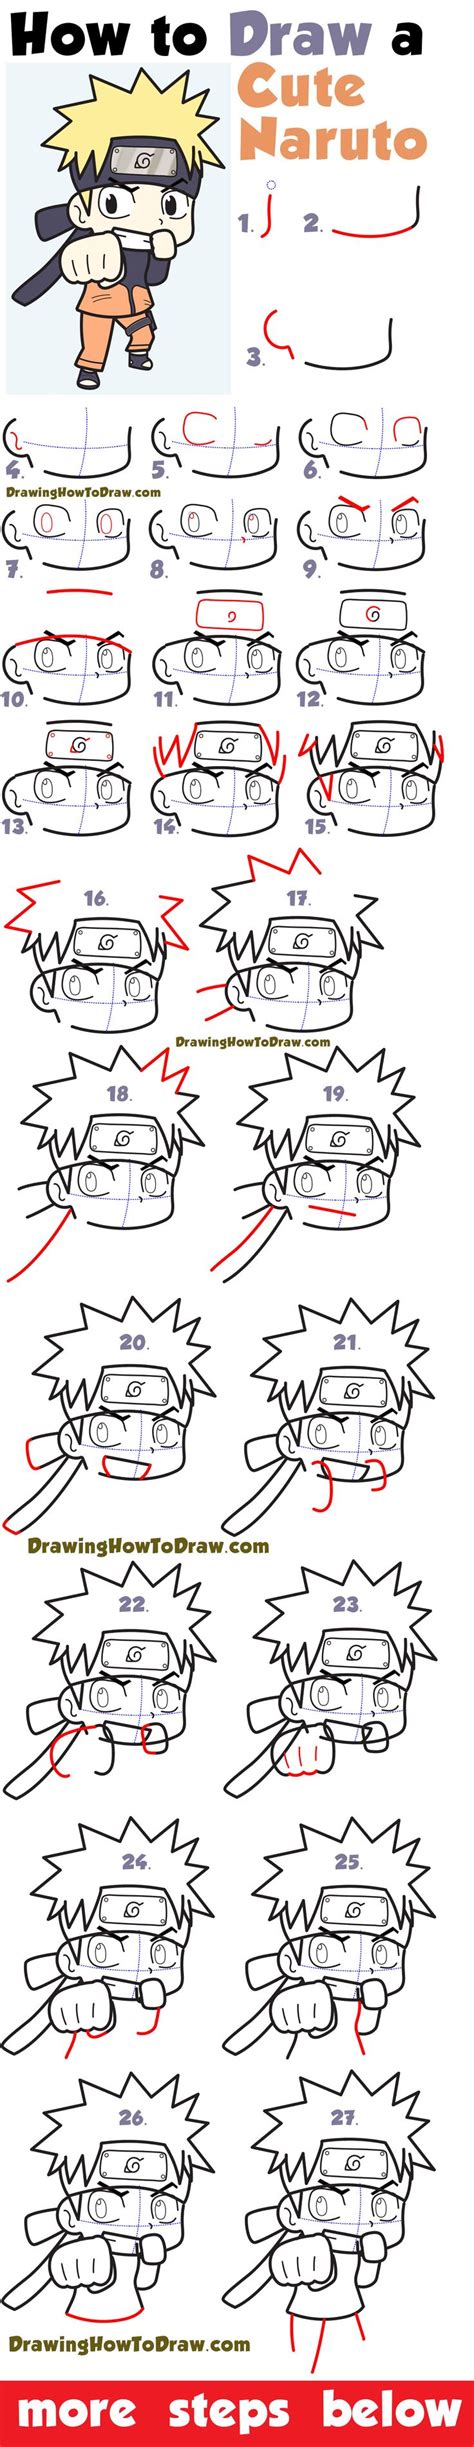 How To Draw A Cute Chibi Naruto Easy Step By Step Drawing Tutorial